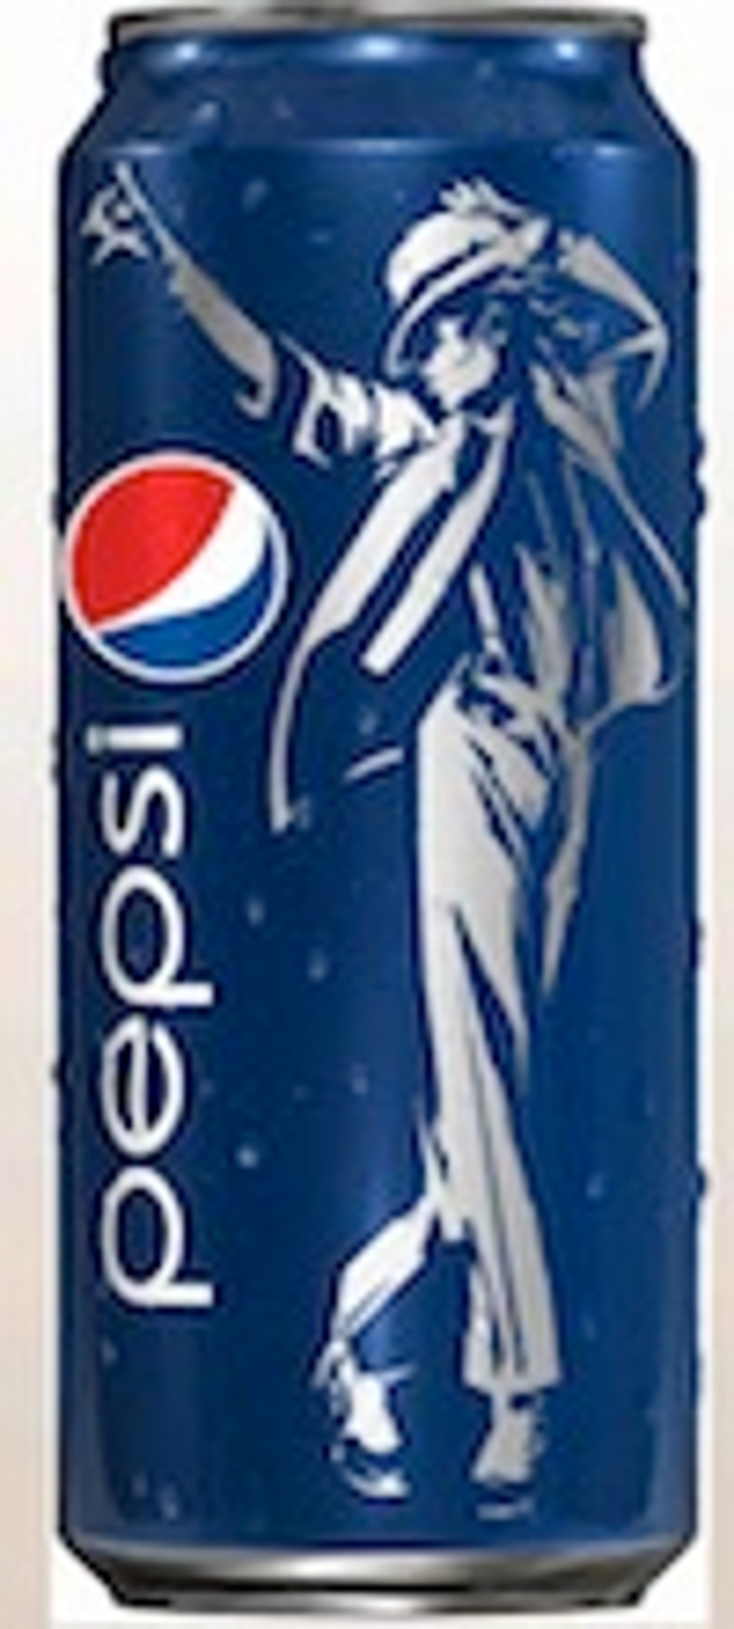 PepsiCo Appoints Agent in Russia